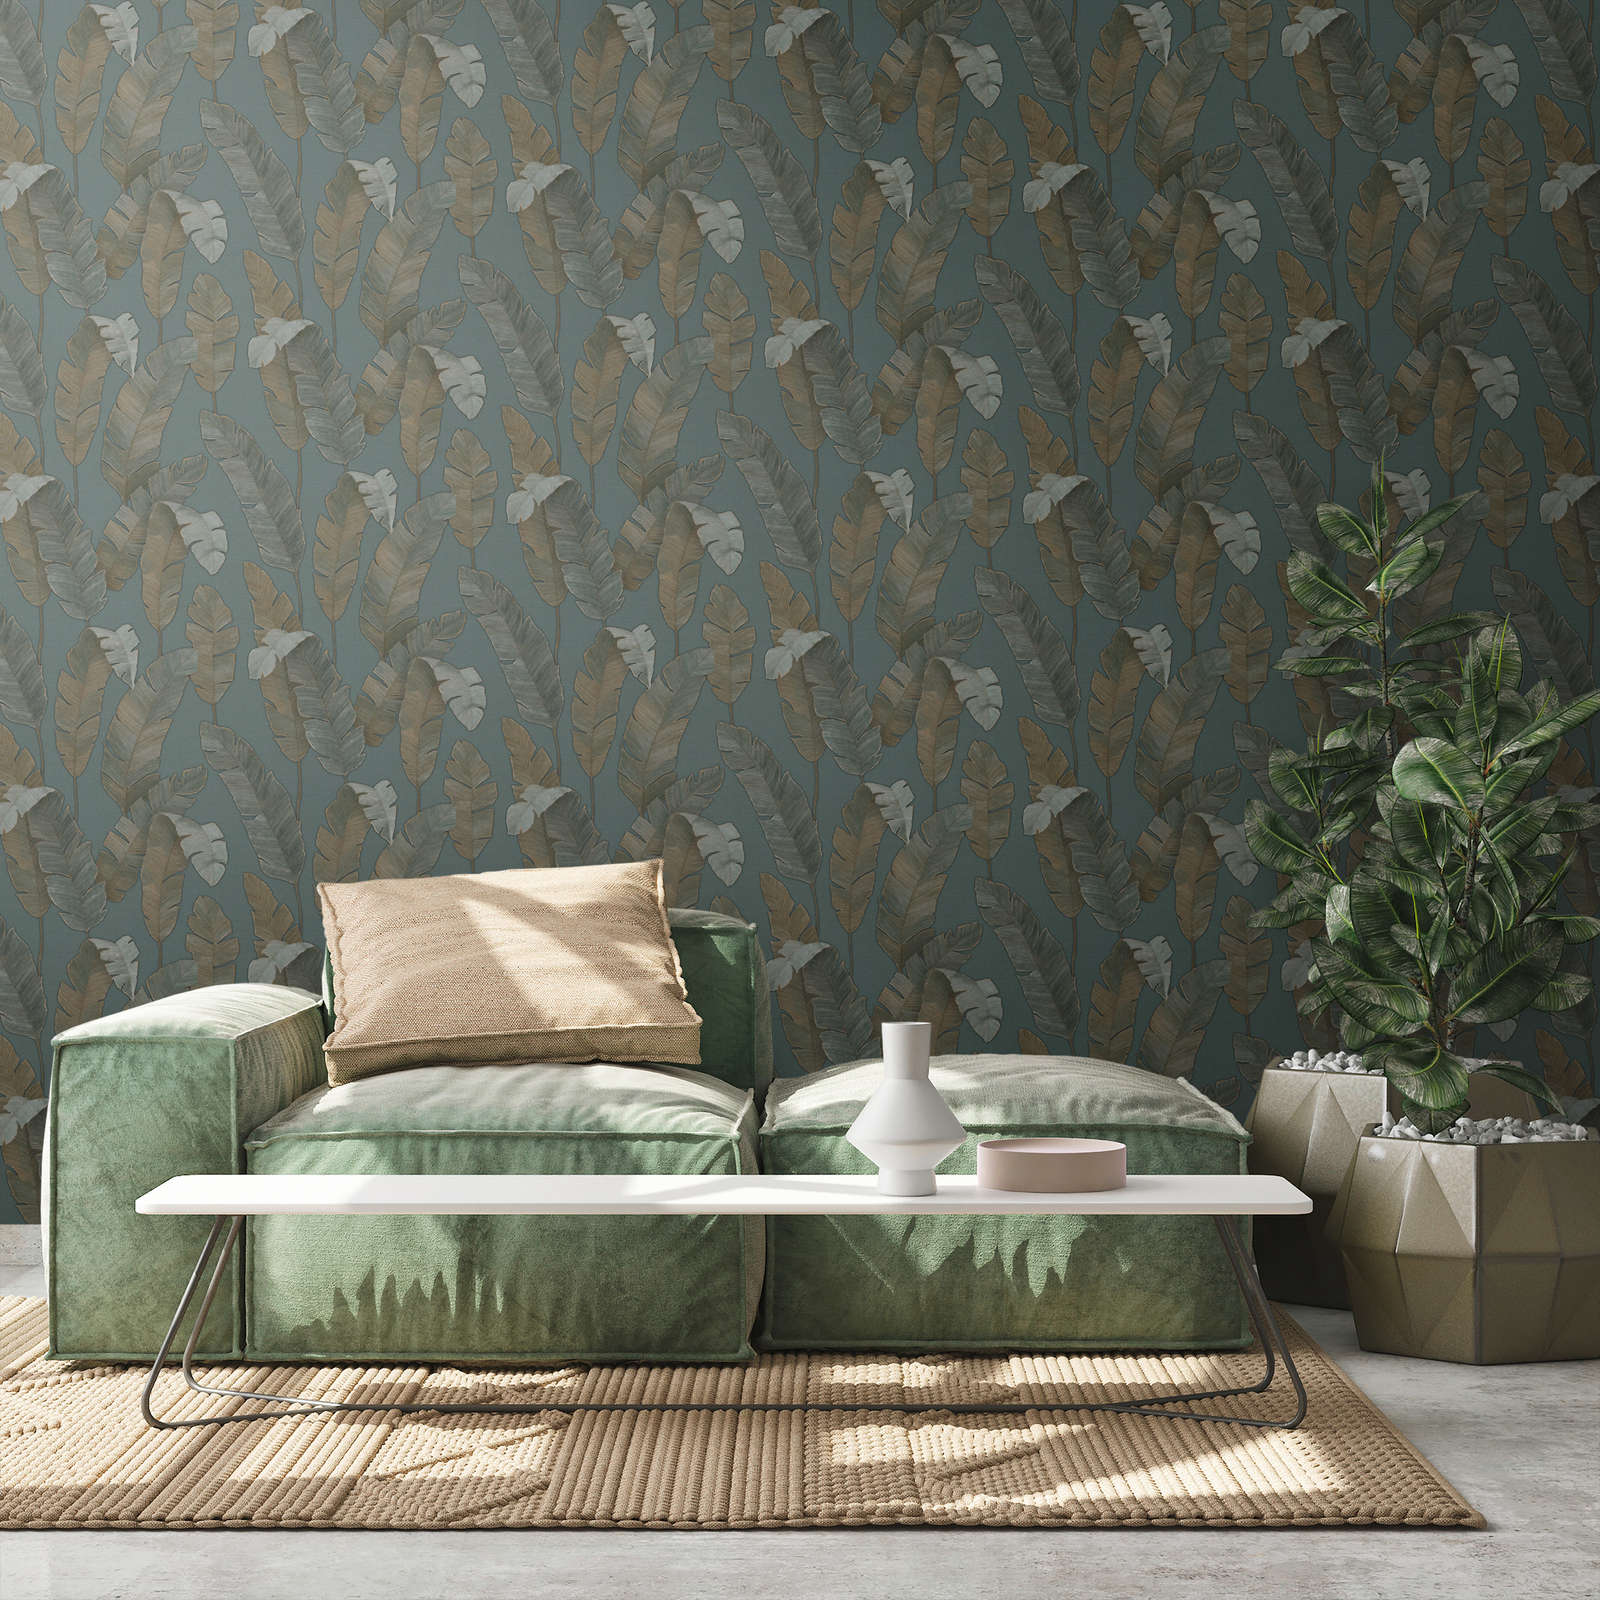             Non-woven wallpaper with large palm leaves in dark colour - petrol, green, brown
        